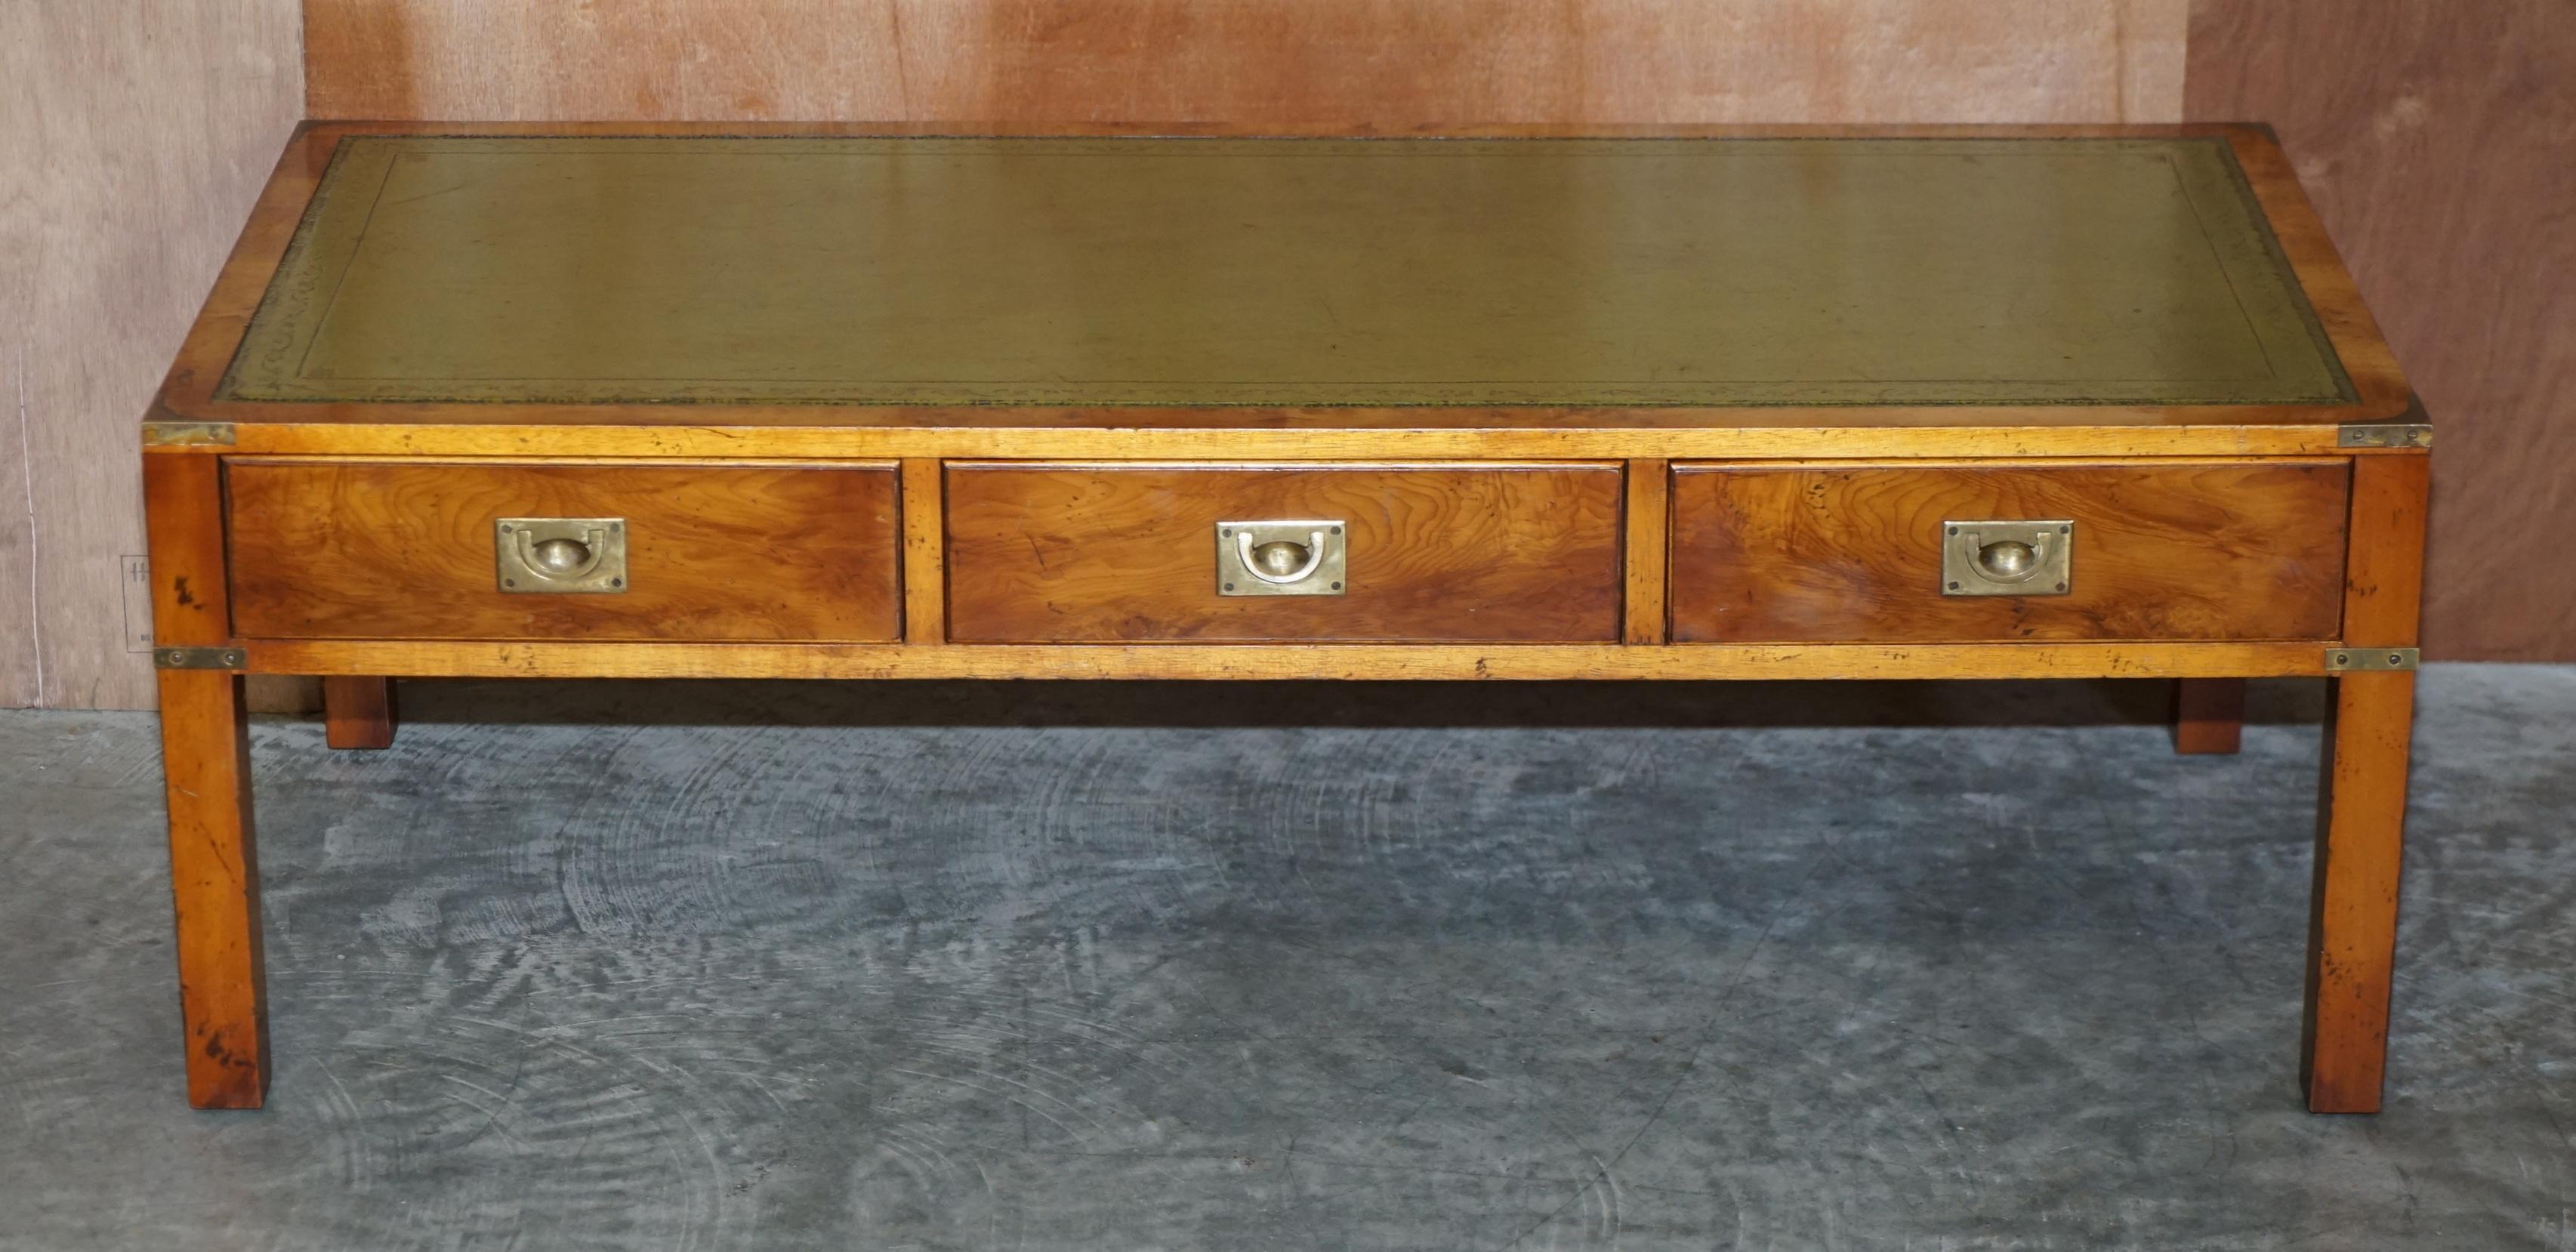 We are delighted to offer for sale this vintage collectable Harrods London Military Campaign three drawer coffee table made by Kennedy with green leather top in Burr Elm

This piece was sold through Harrods approximately 20-30 years ago, it was